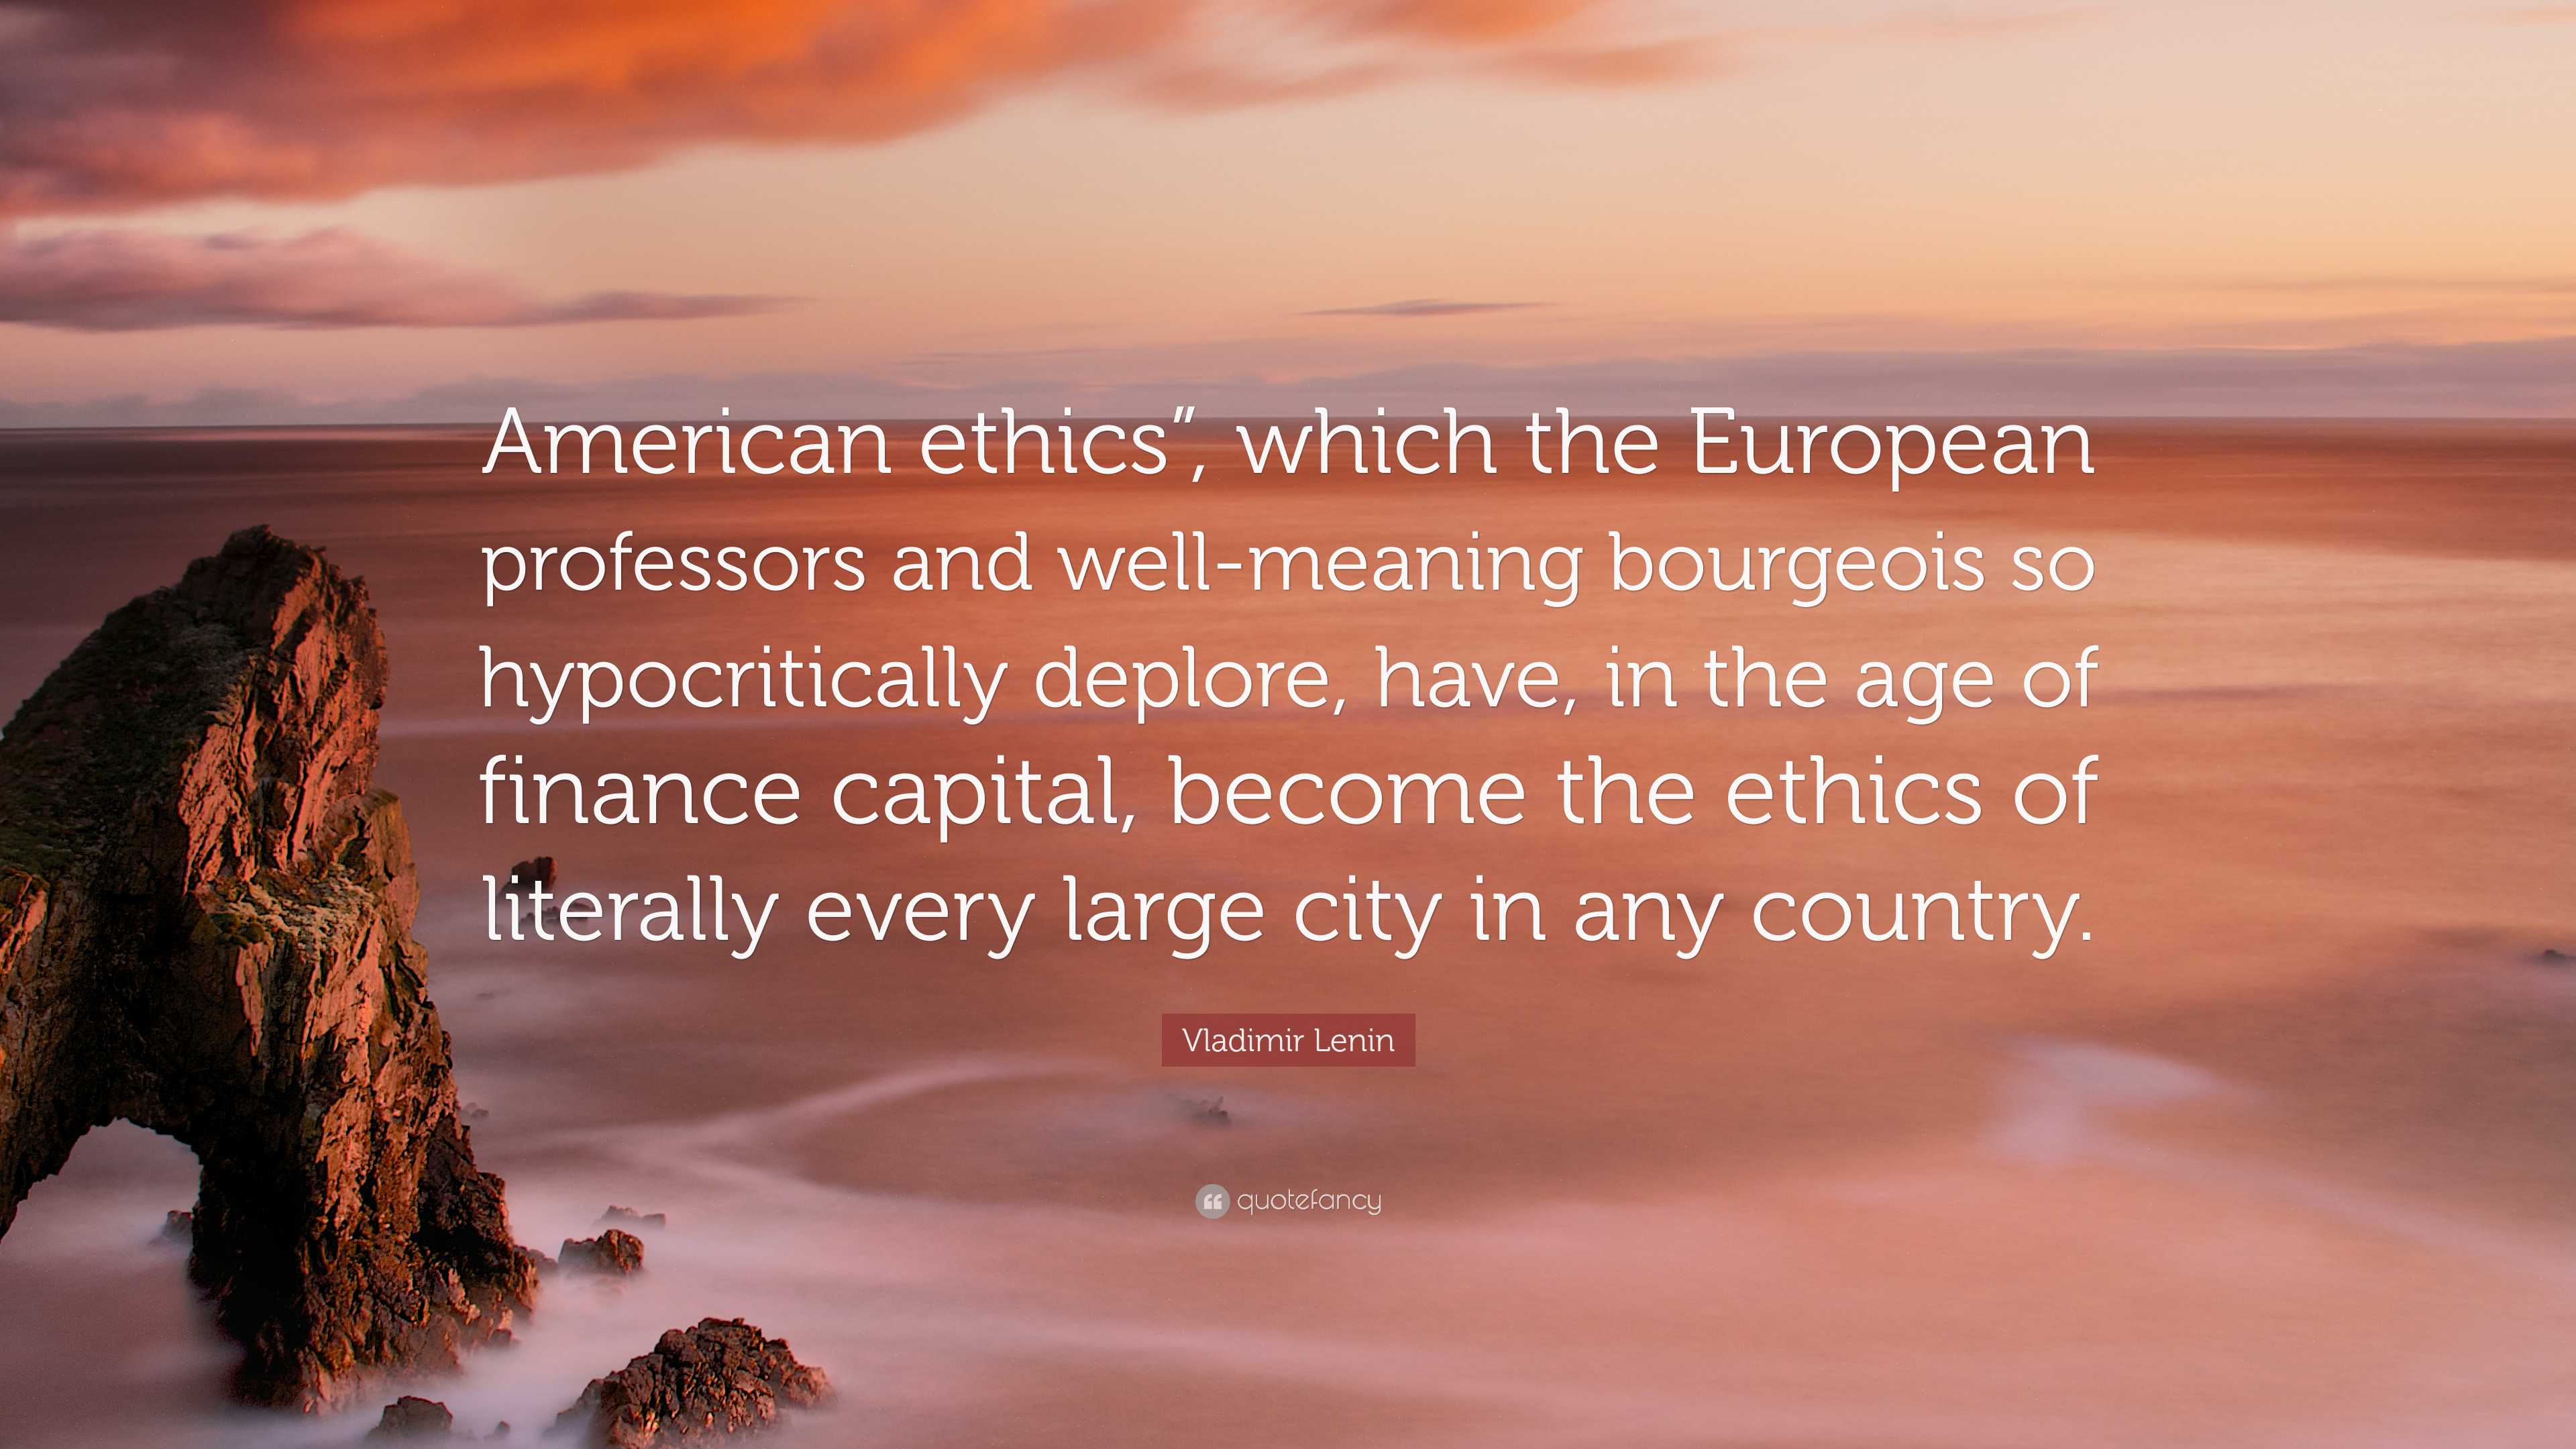 Vladimir Lenin Quote: “American ethics”, which the European professors and  well-meaning bourgeois so hypocritically deplore, have, in the age o”